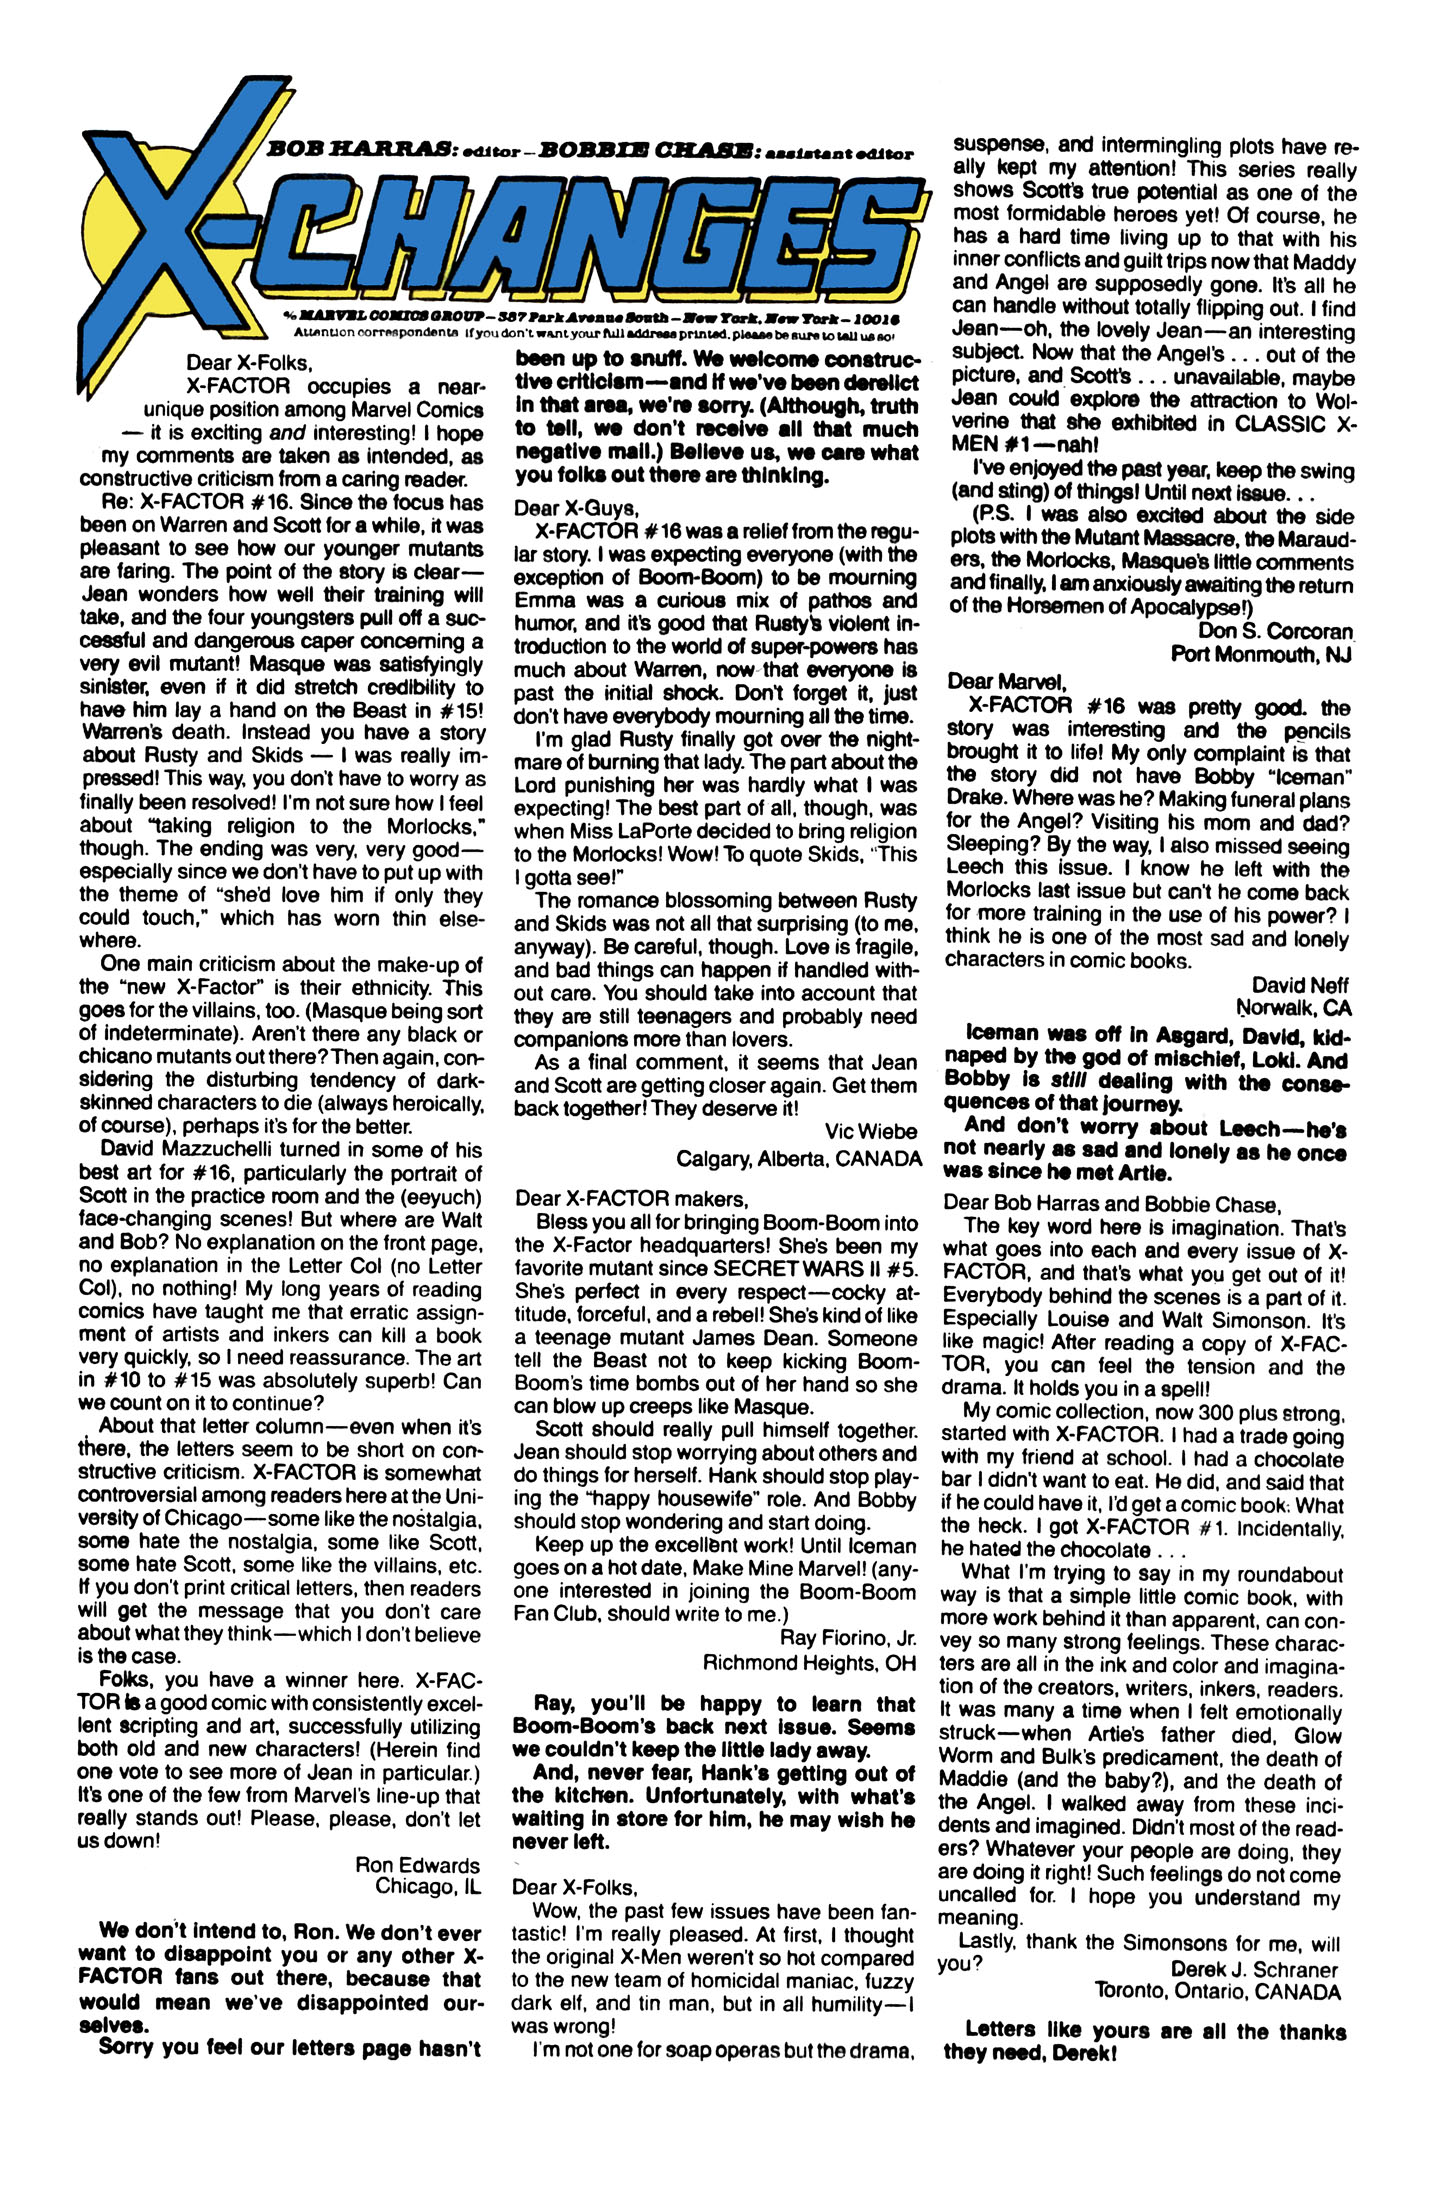 X-Factor (1986) 21 Page 23